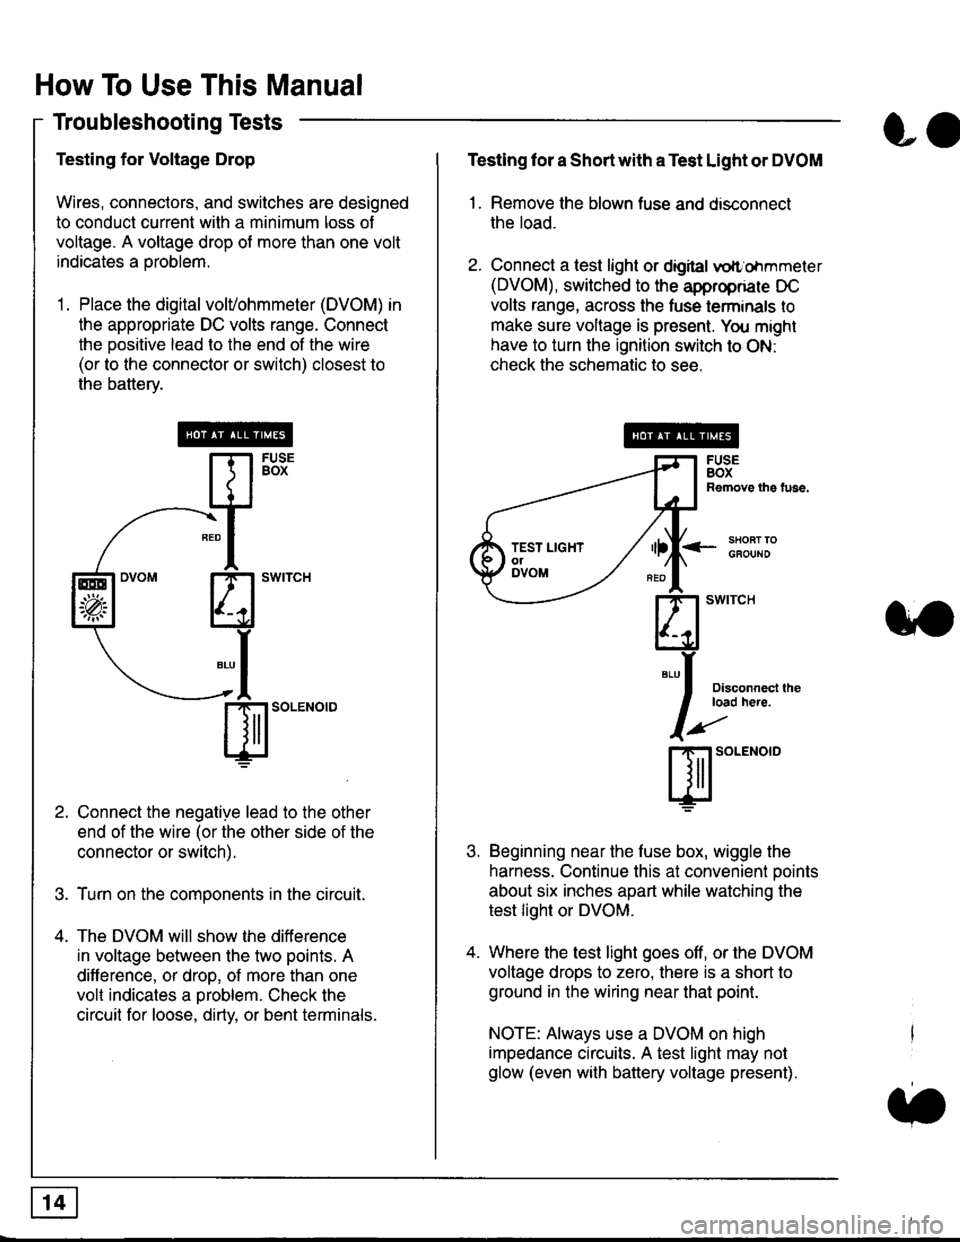 HONDA CIVIC 1998 6.G Workshop Manual How To Use This Manual
Troubleshooting Tests
Testing for Voltage Drop
Wires, connectors, and switches are designed
to conduct current wilh a minimum loss of
voltage. A voltage drop of more than one vo